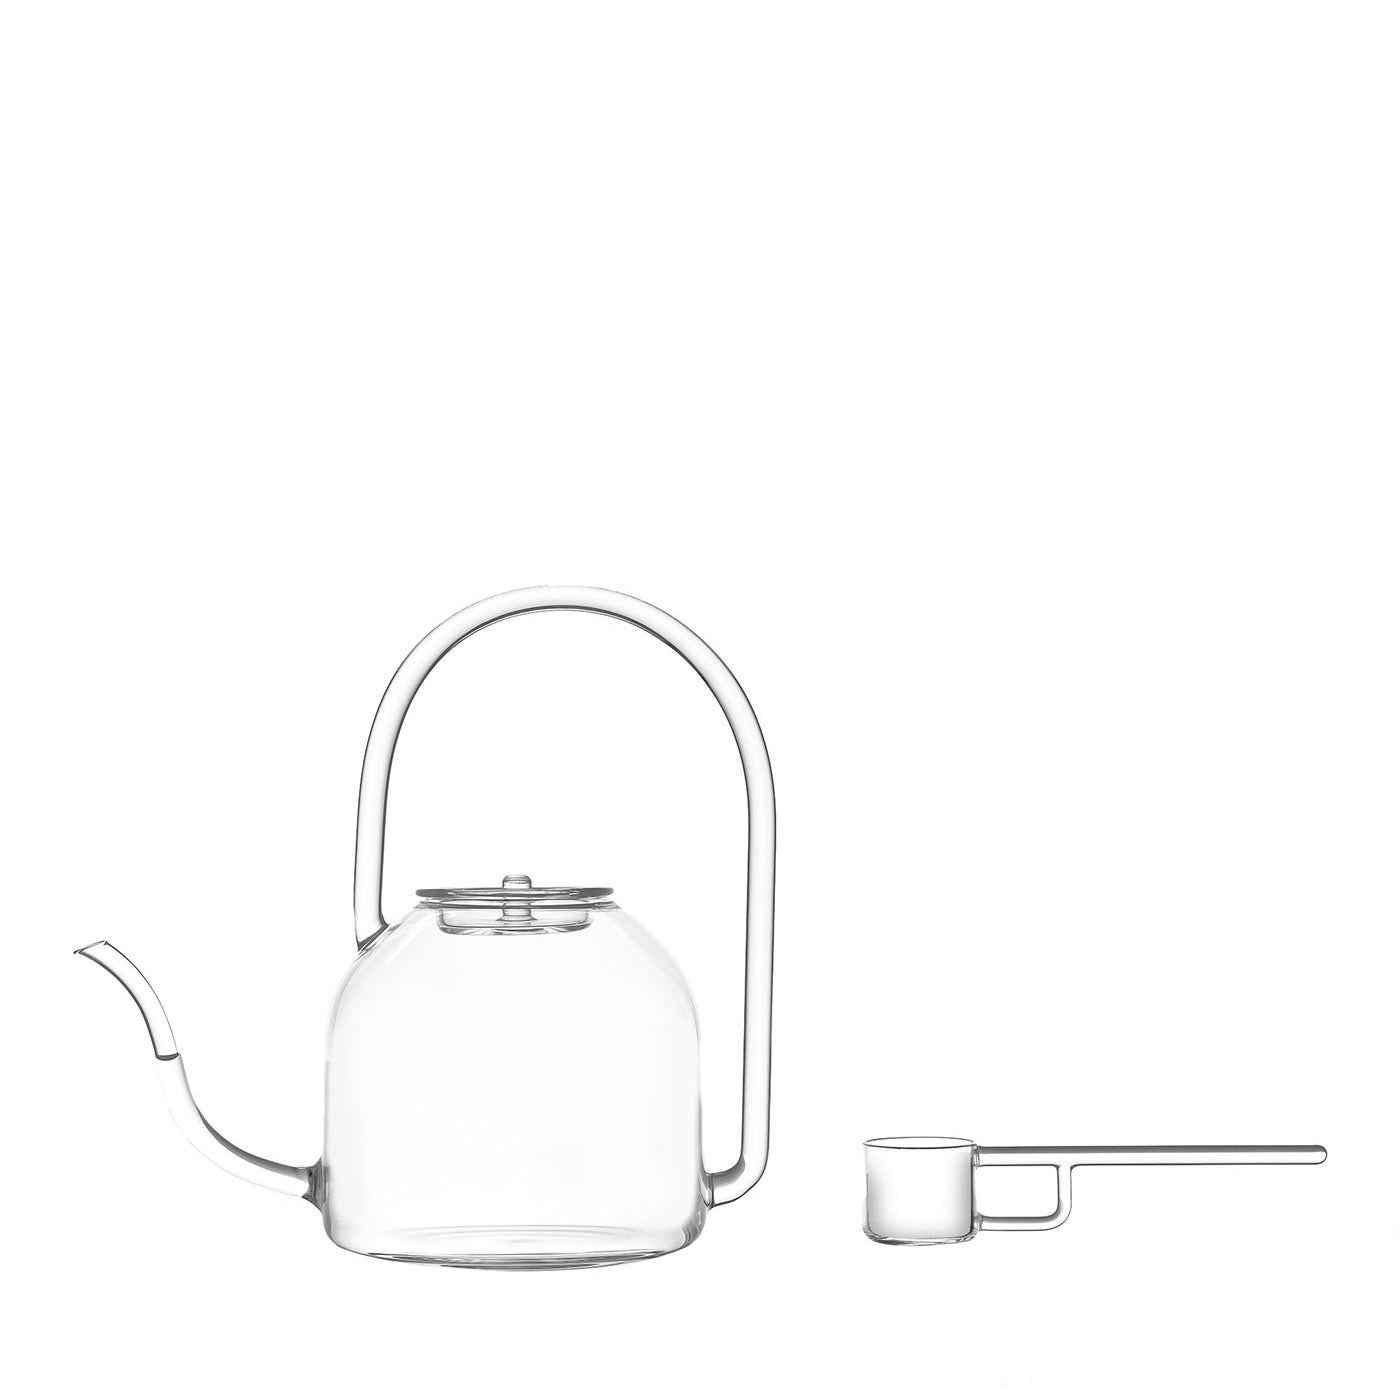 Phil Ninety-Three Kettle and Phil Ten spoon by Naessi Studio - Main view